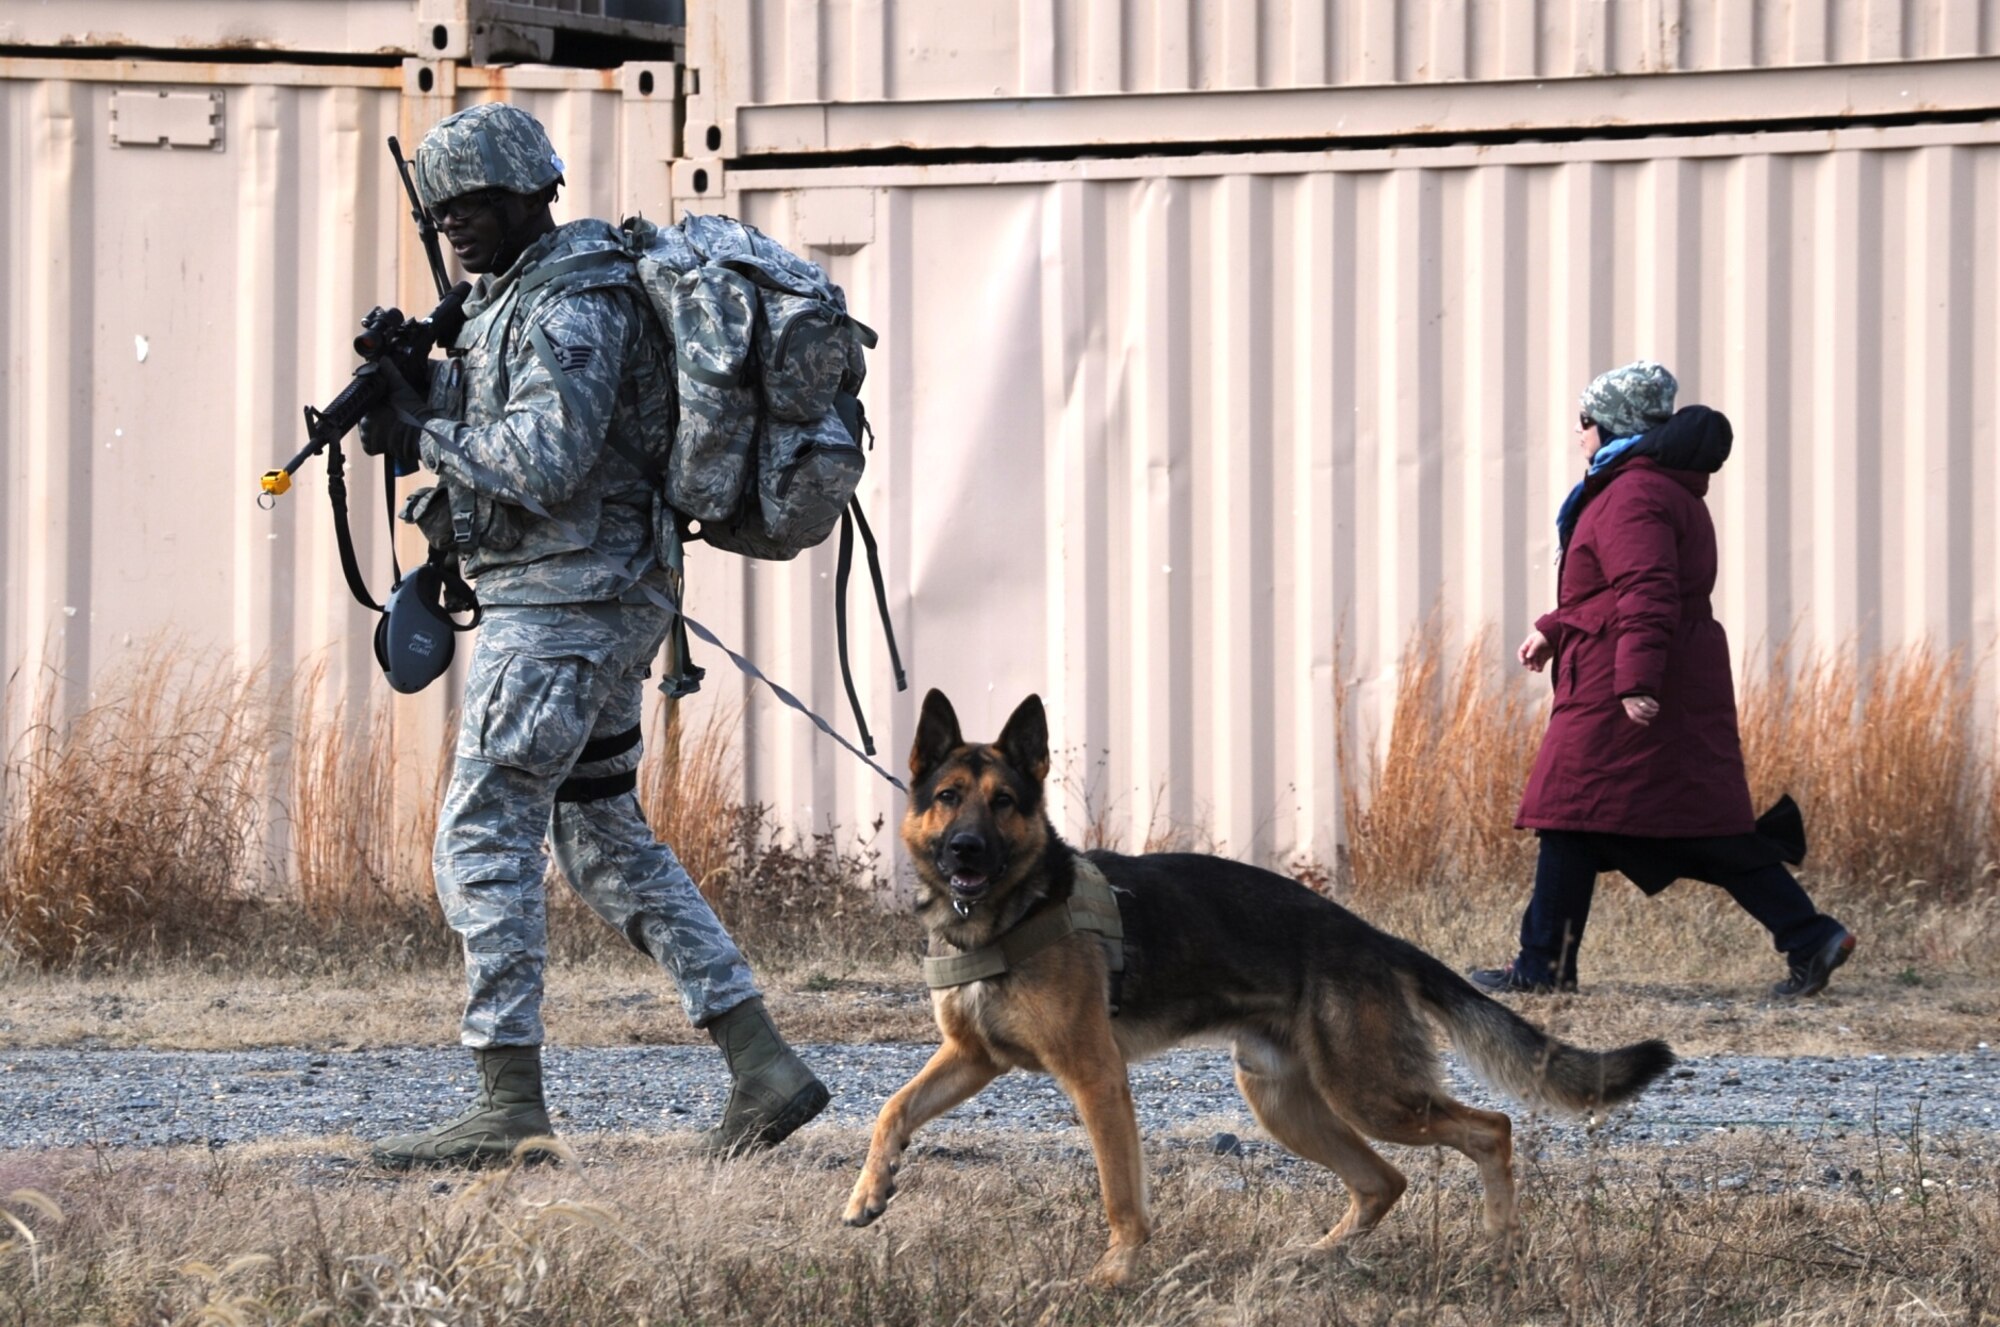 Staff Sgt. Desmond Martin, military working dog handler from Peterson Air Force Base, Colo., performs an explosive sweep in a village with Rocky, a MWD, during the MWD Base Security Operations Course Nov. 10, 2013, at Joint Base McGuire-Dix-Lakehurst, N.J.  (U.S. Air Force photo by Staff Sgt. Nathaniel Bevier/Released)